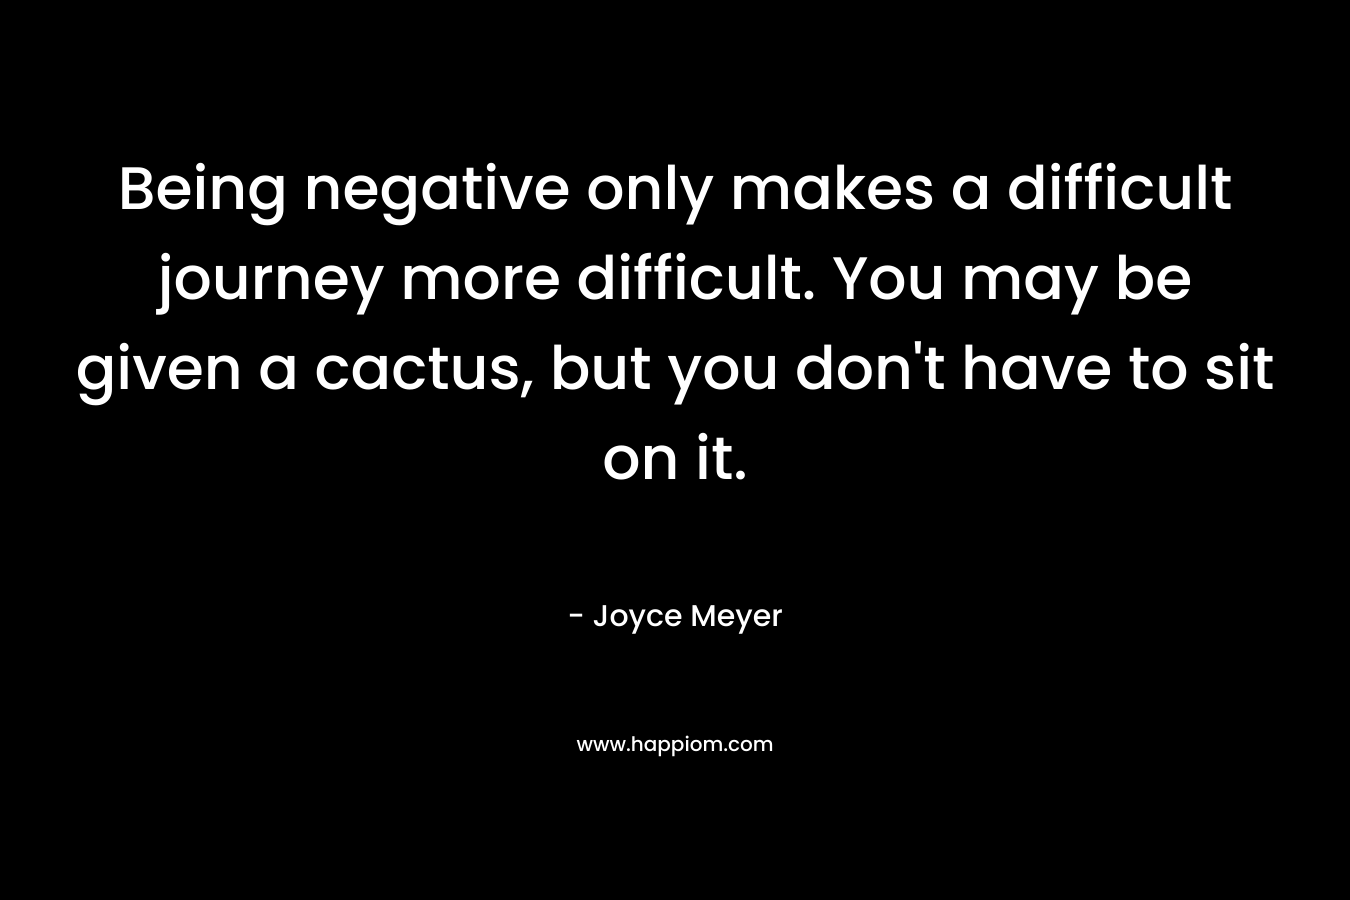 Being negative only makes a difficult journey more difficult. You may be given a cactus, but you don’t have to sit on it. – Joyce Meyer